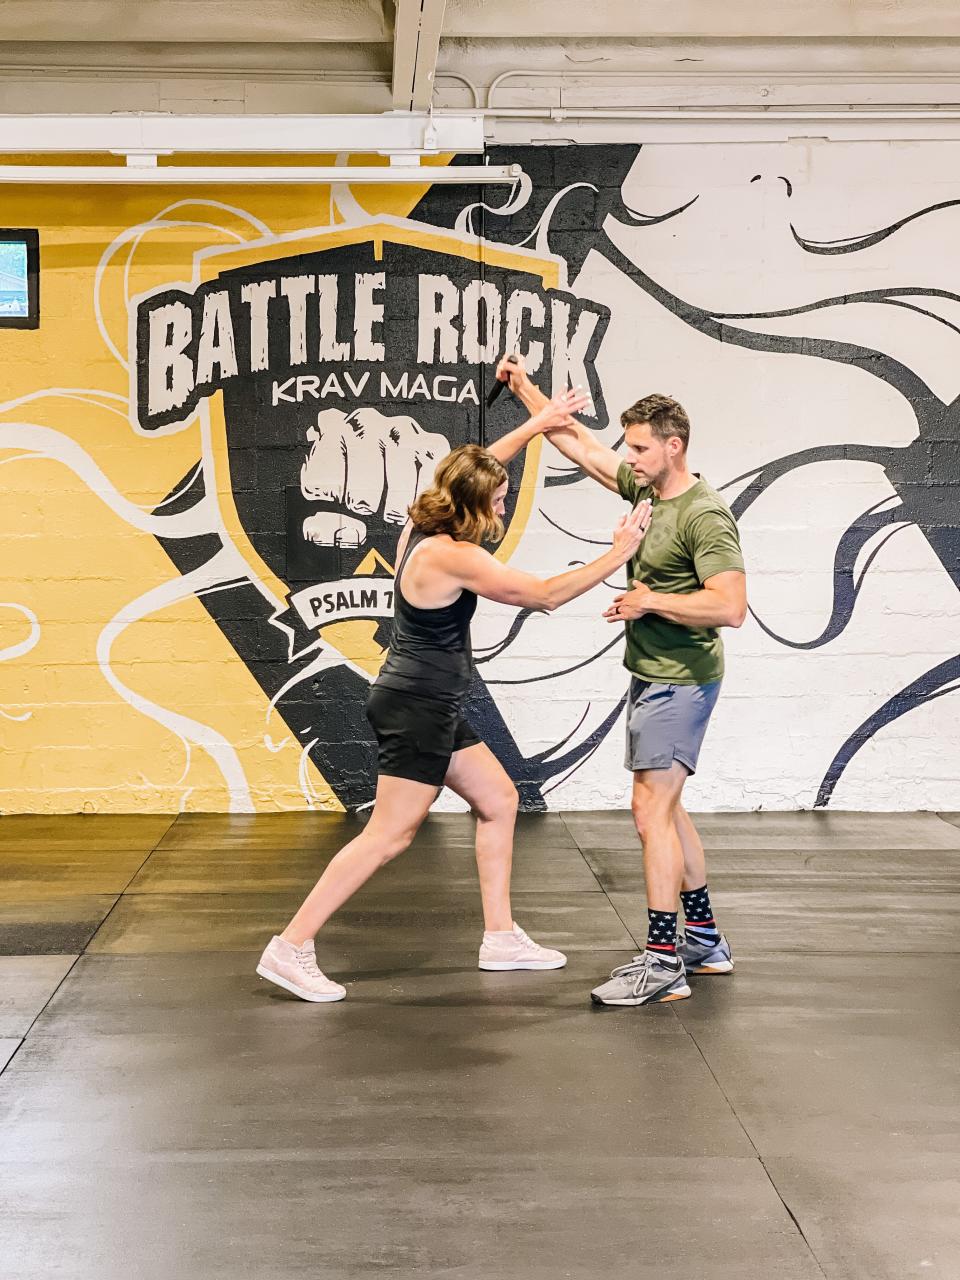 Janice and Todd Mills, owners of the Battle Rock Krav Maga gym in Fountain City, said they are constantly practicing and learning when it comes to Krav Maga. “Before we moved locations we were limited; when we found this space it gave us the desire to offer workouts and specialty courses,” said Janice Mills. “It has been really cool to grow that over time to reach more people.”
May 10, 2022.